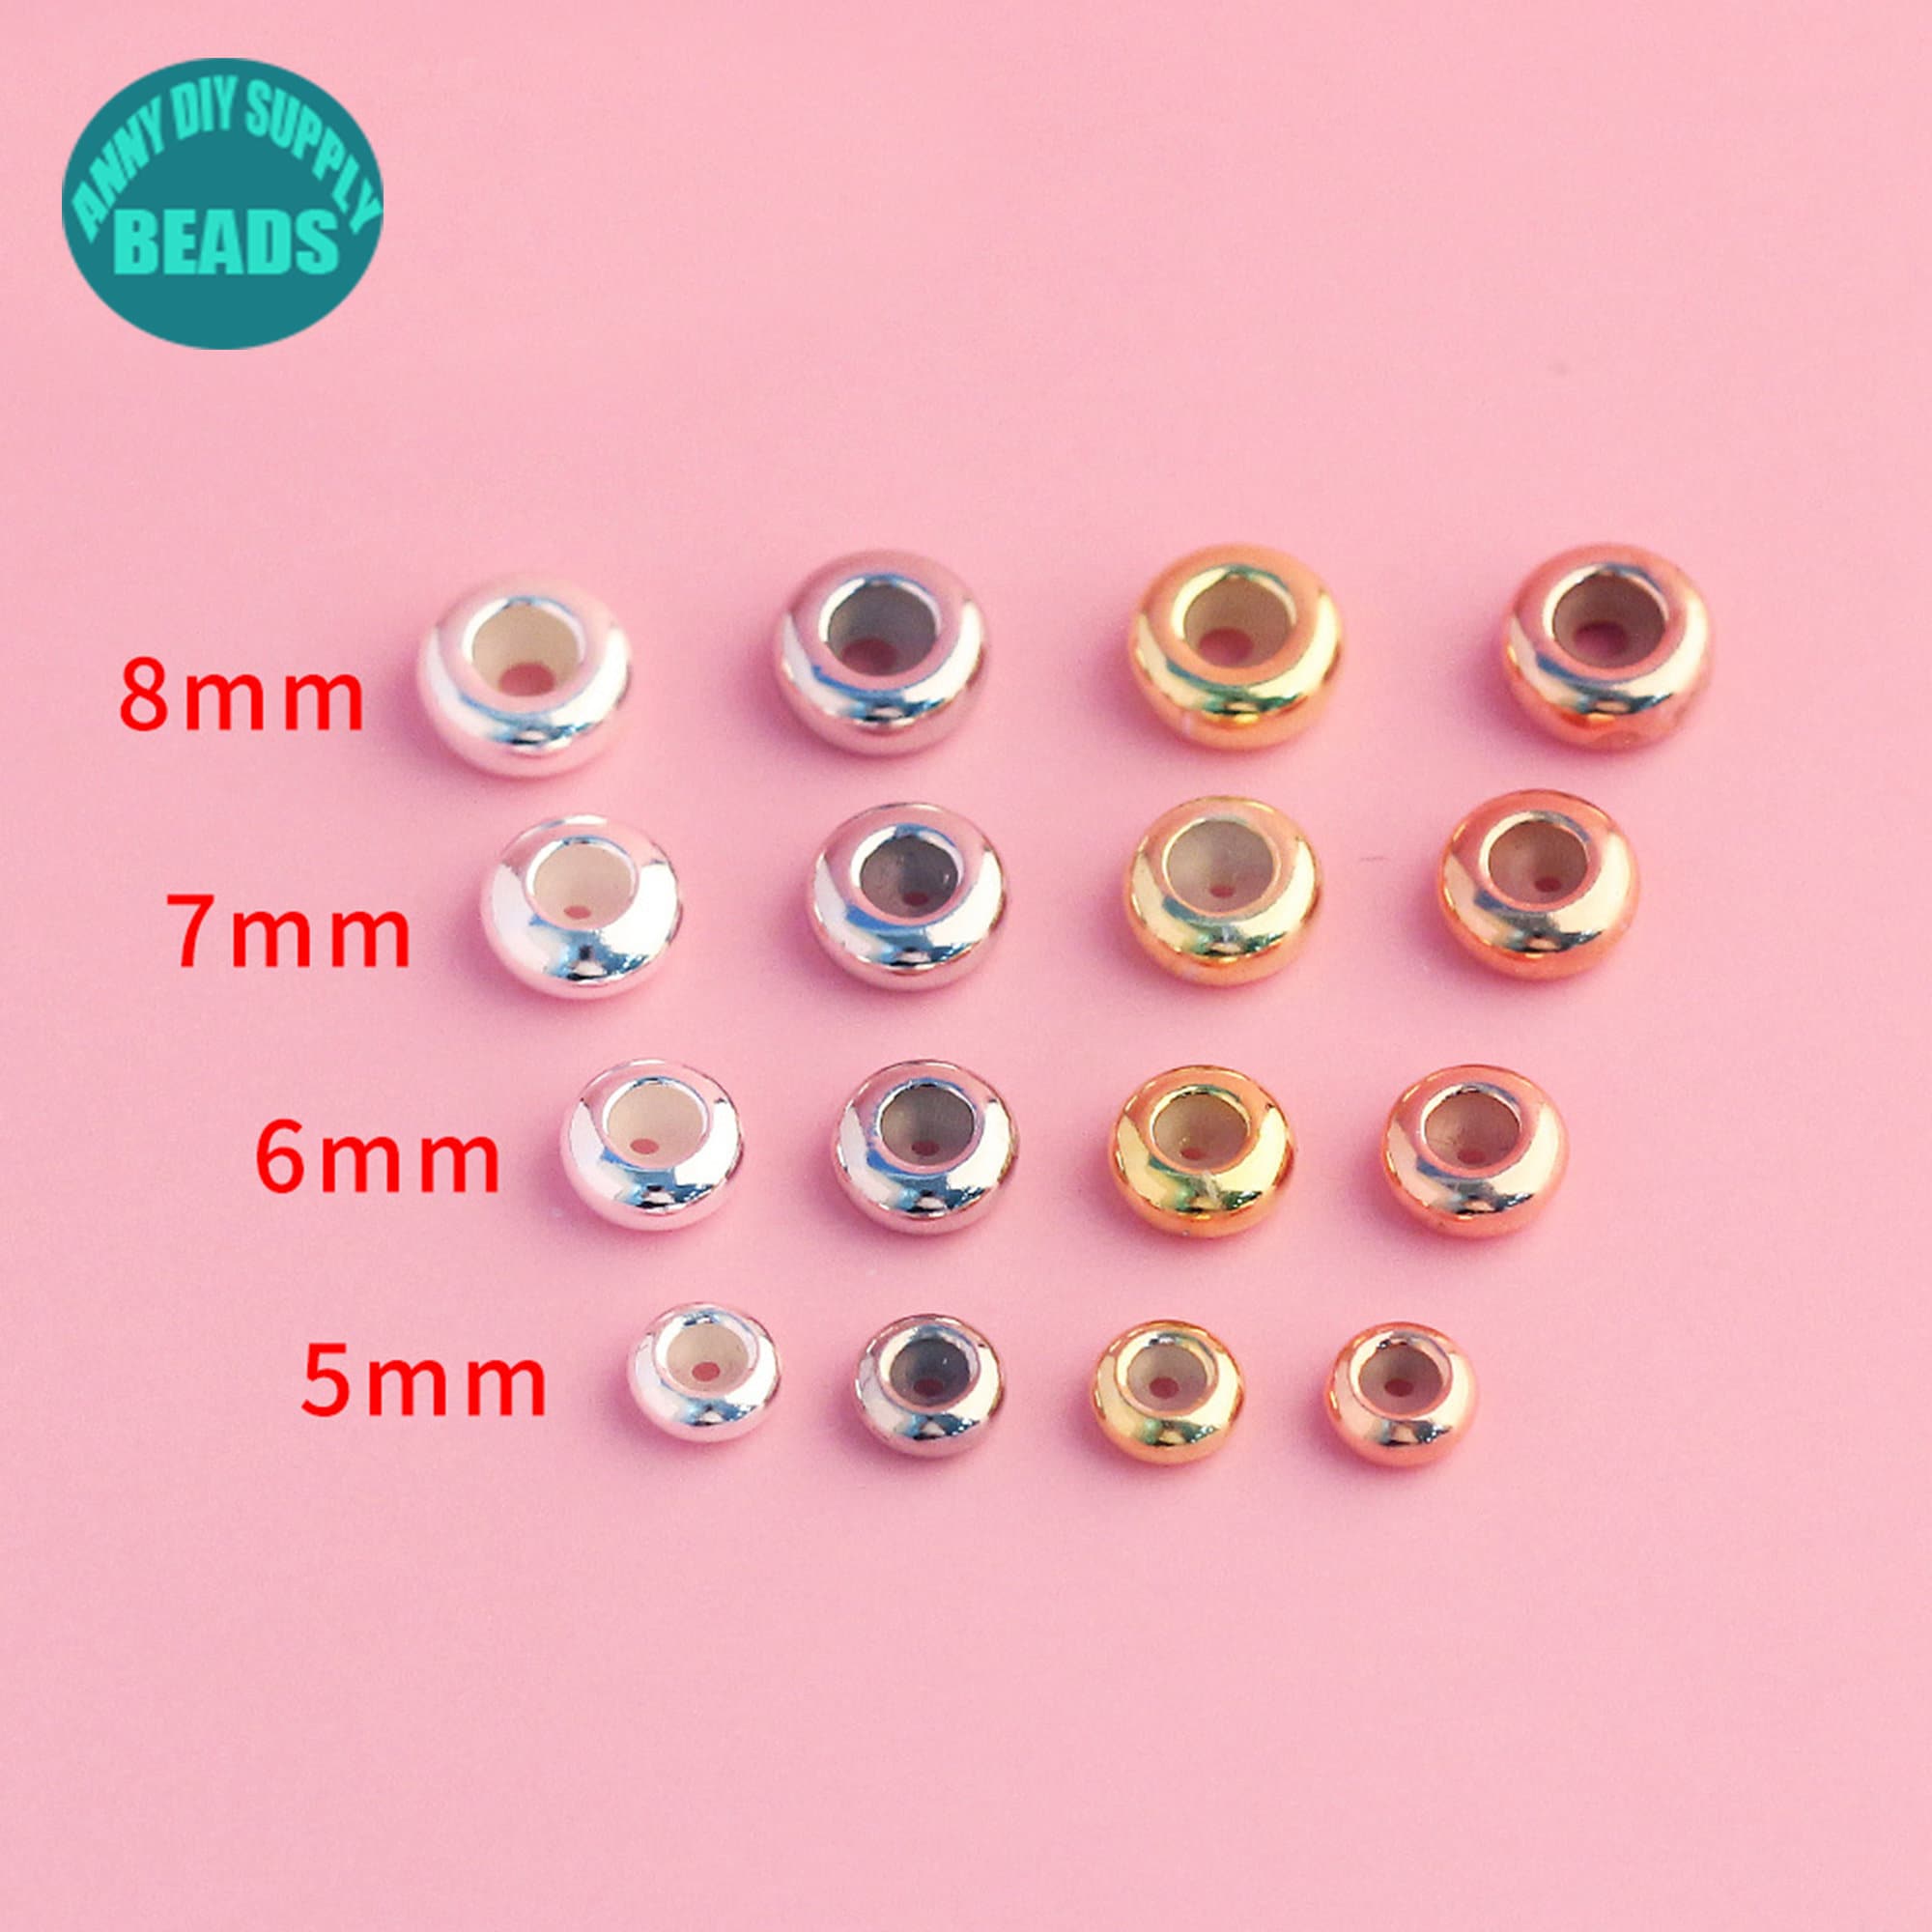 8-pk Metal Springs Bead Stopper, DIY Bead Stopper, Jewelry Making Supplies,  Beading Supplies, DIY Crafts Bead Crafts Ships Fast US, S-00012 